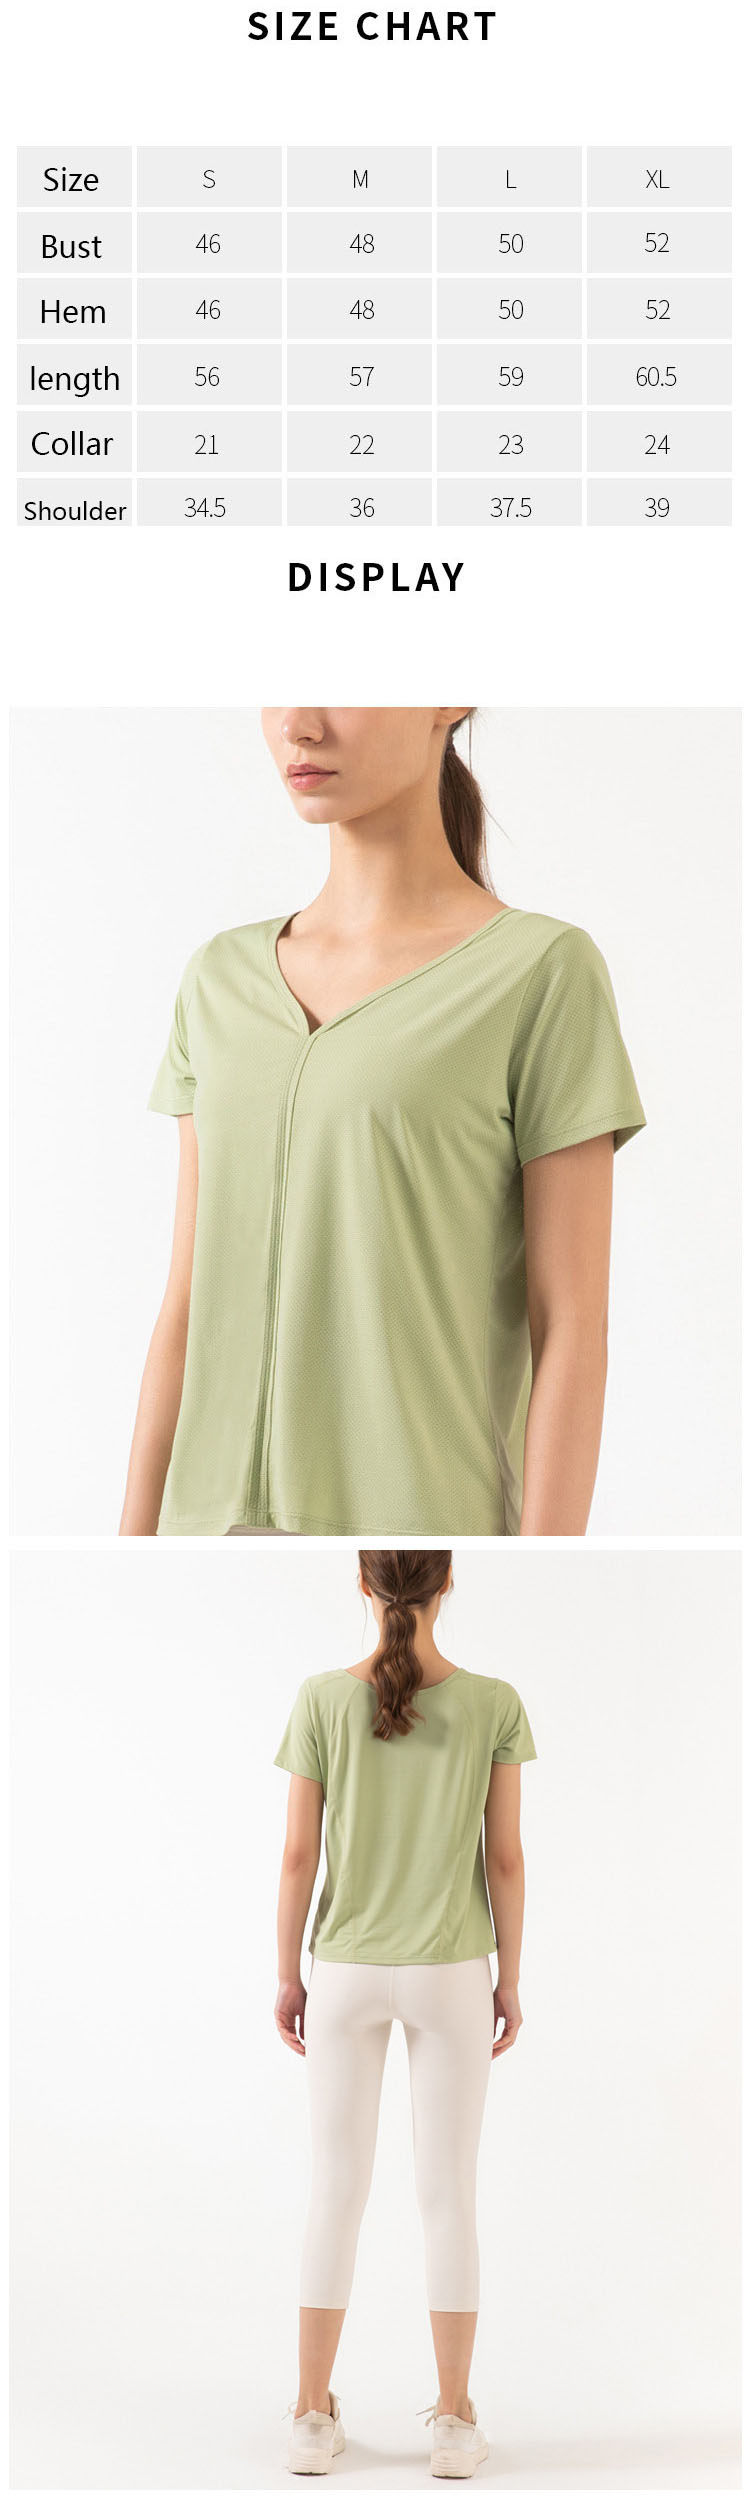 The V-neck shows sexiness, exposing the swan neck, helping to wick away sweat and keeping the skin dry and not stuffy.